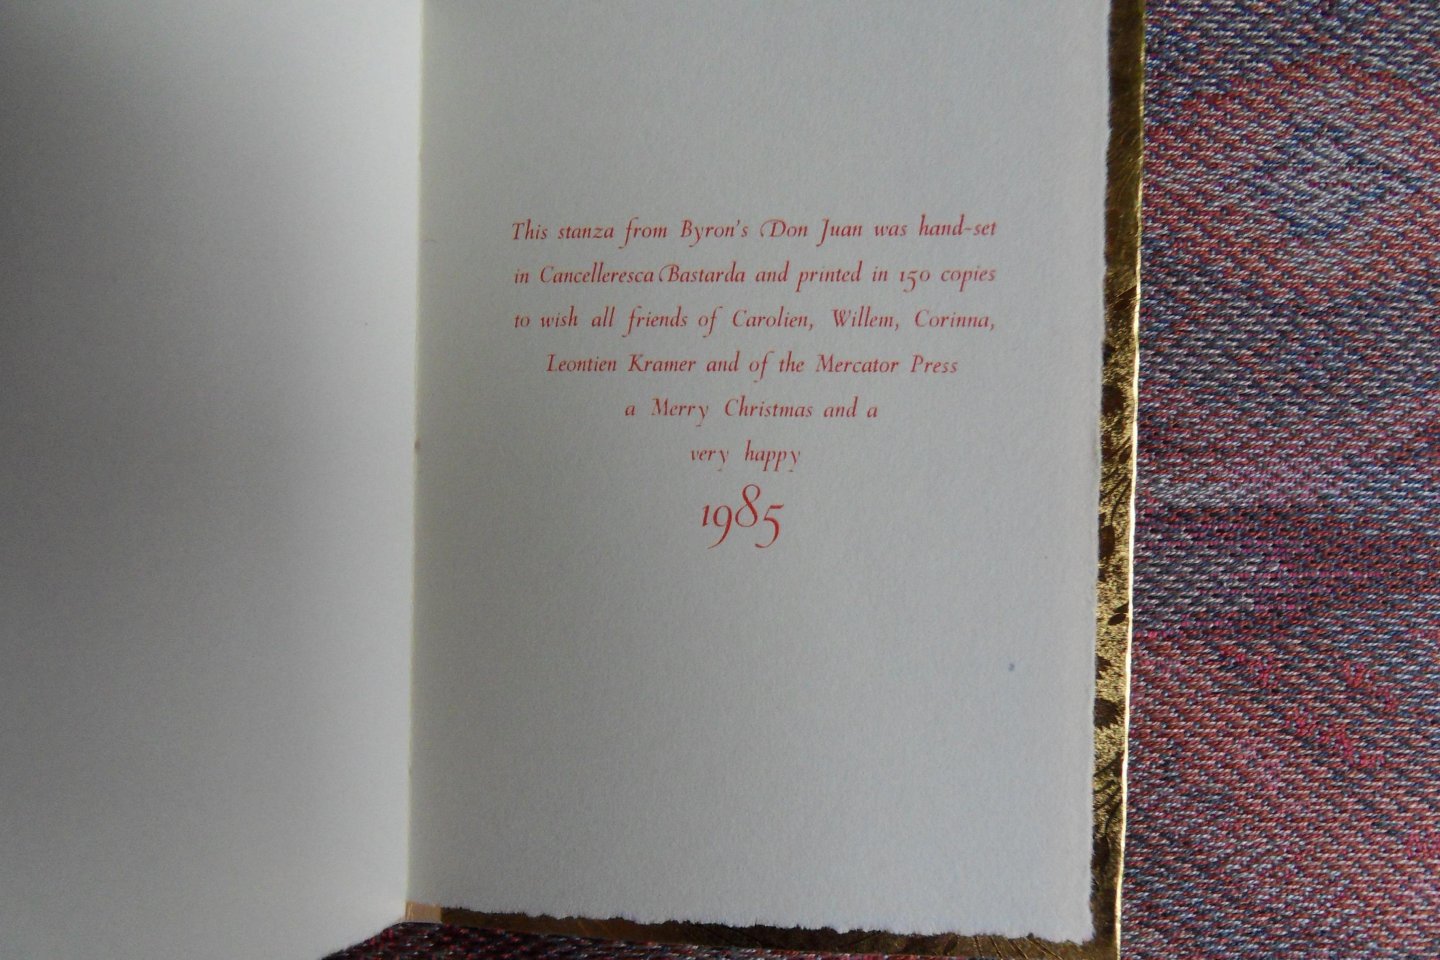 Byron. - Don Juan Canto 2,4. - Best Wishes for 1985. [ Beperkte oplage van 150 ex. ].